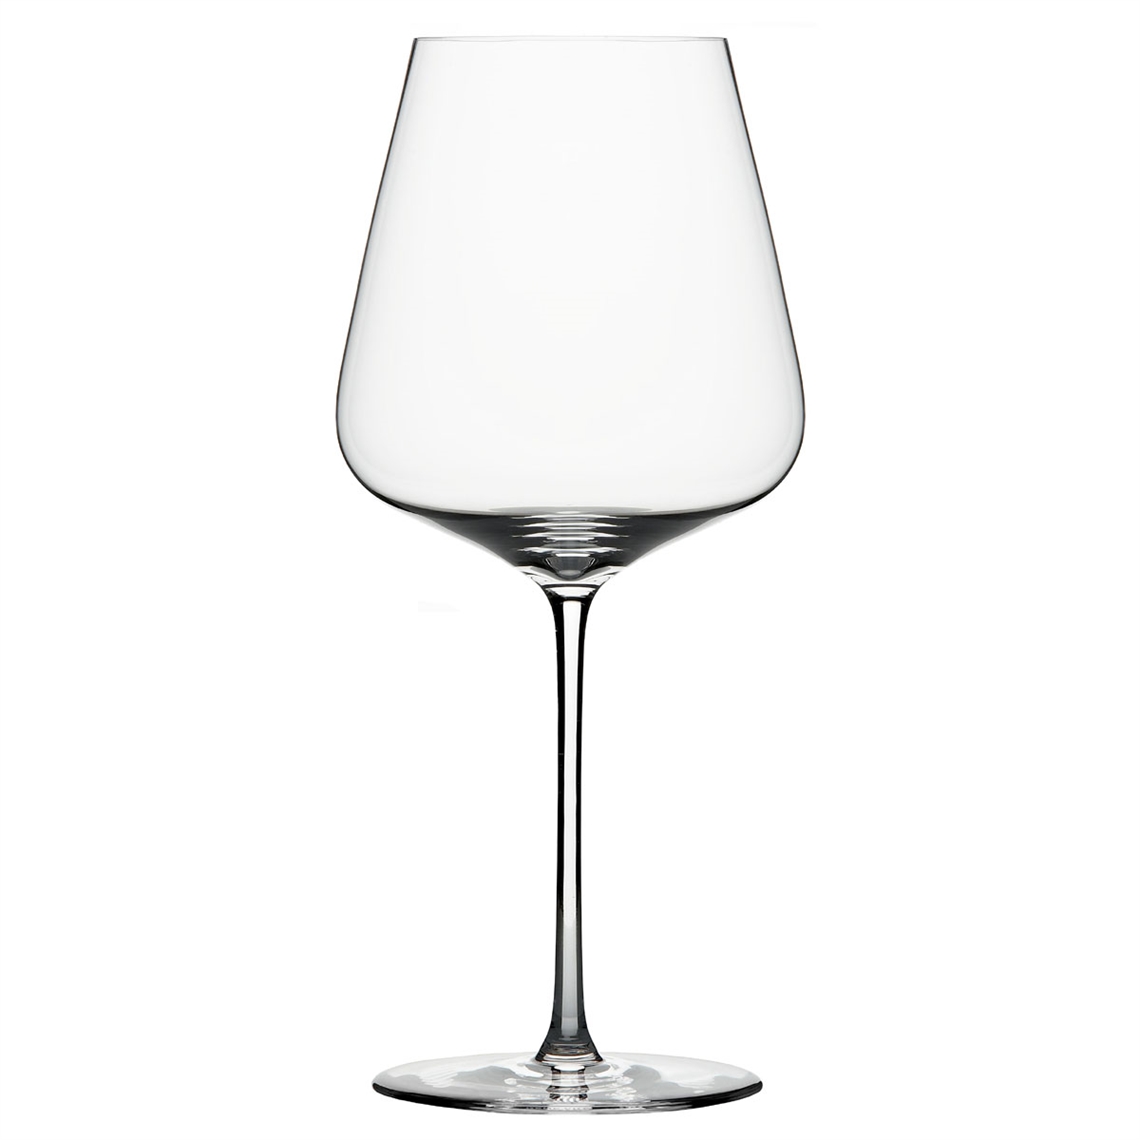 View more fortissimo from our Premium Mouth Blown Glassware range